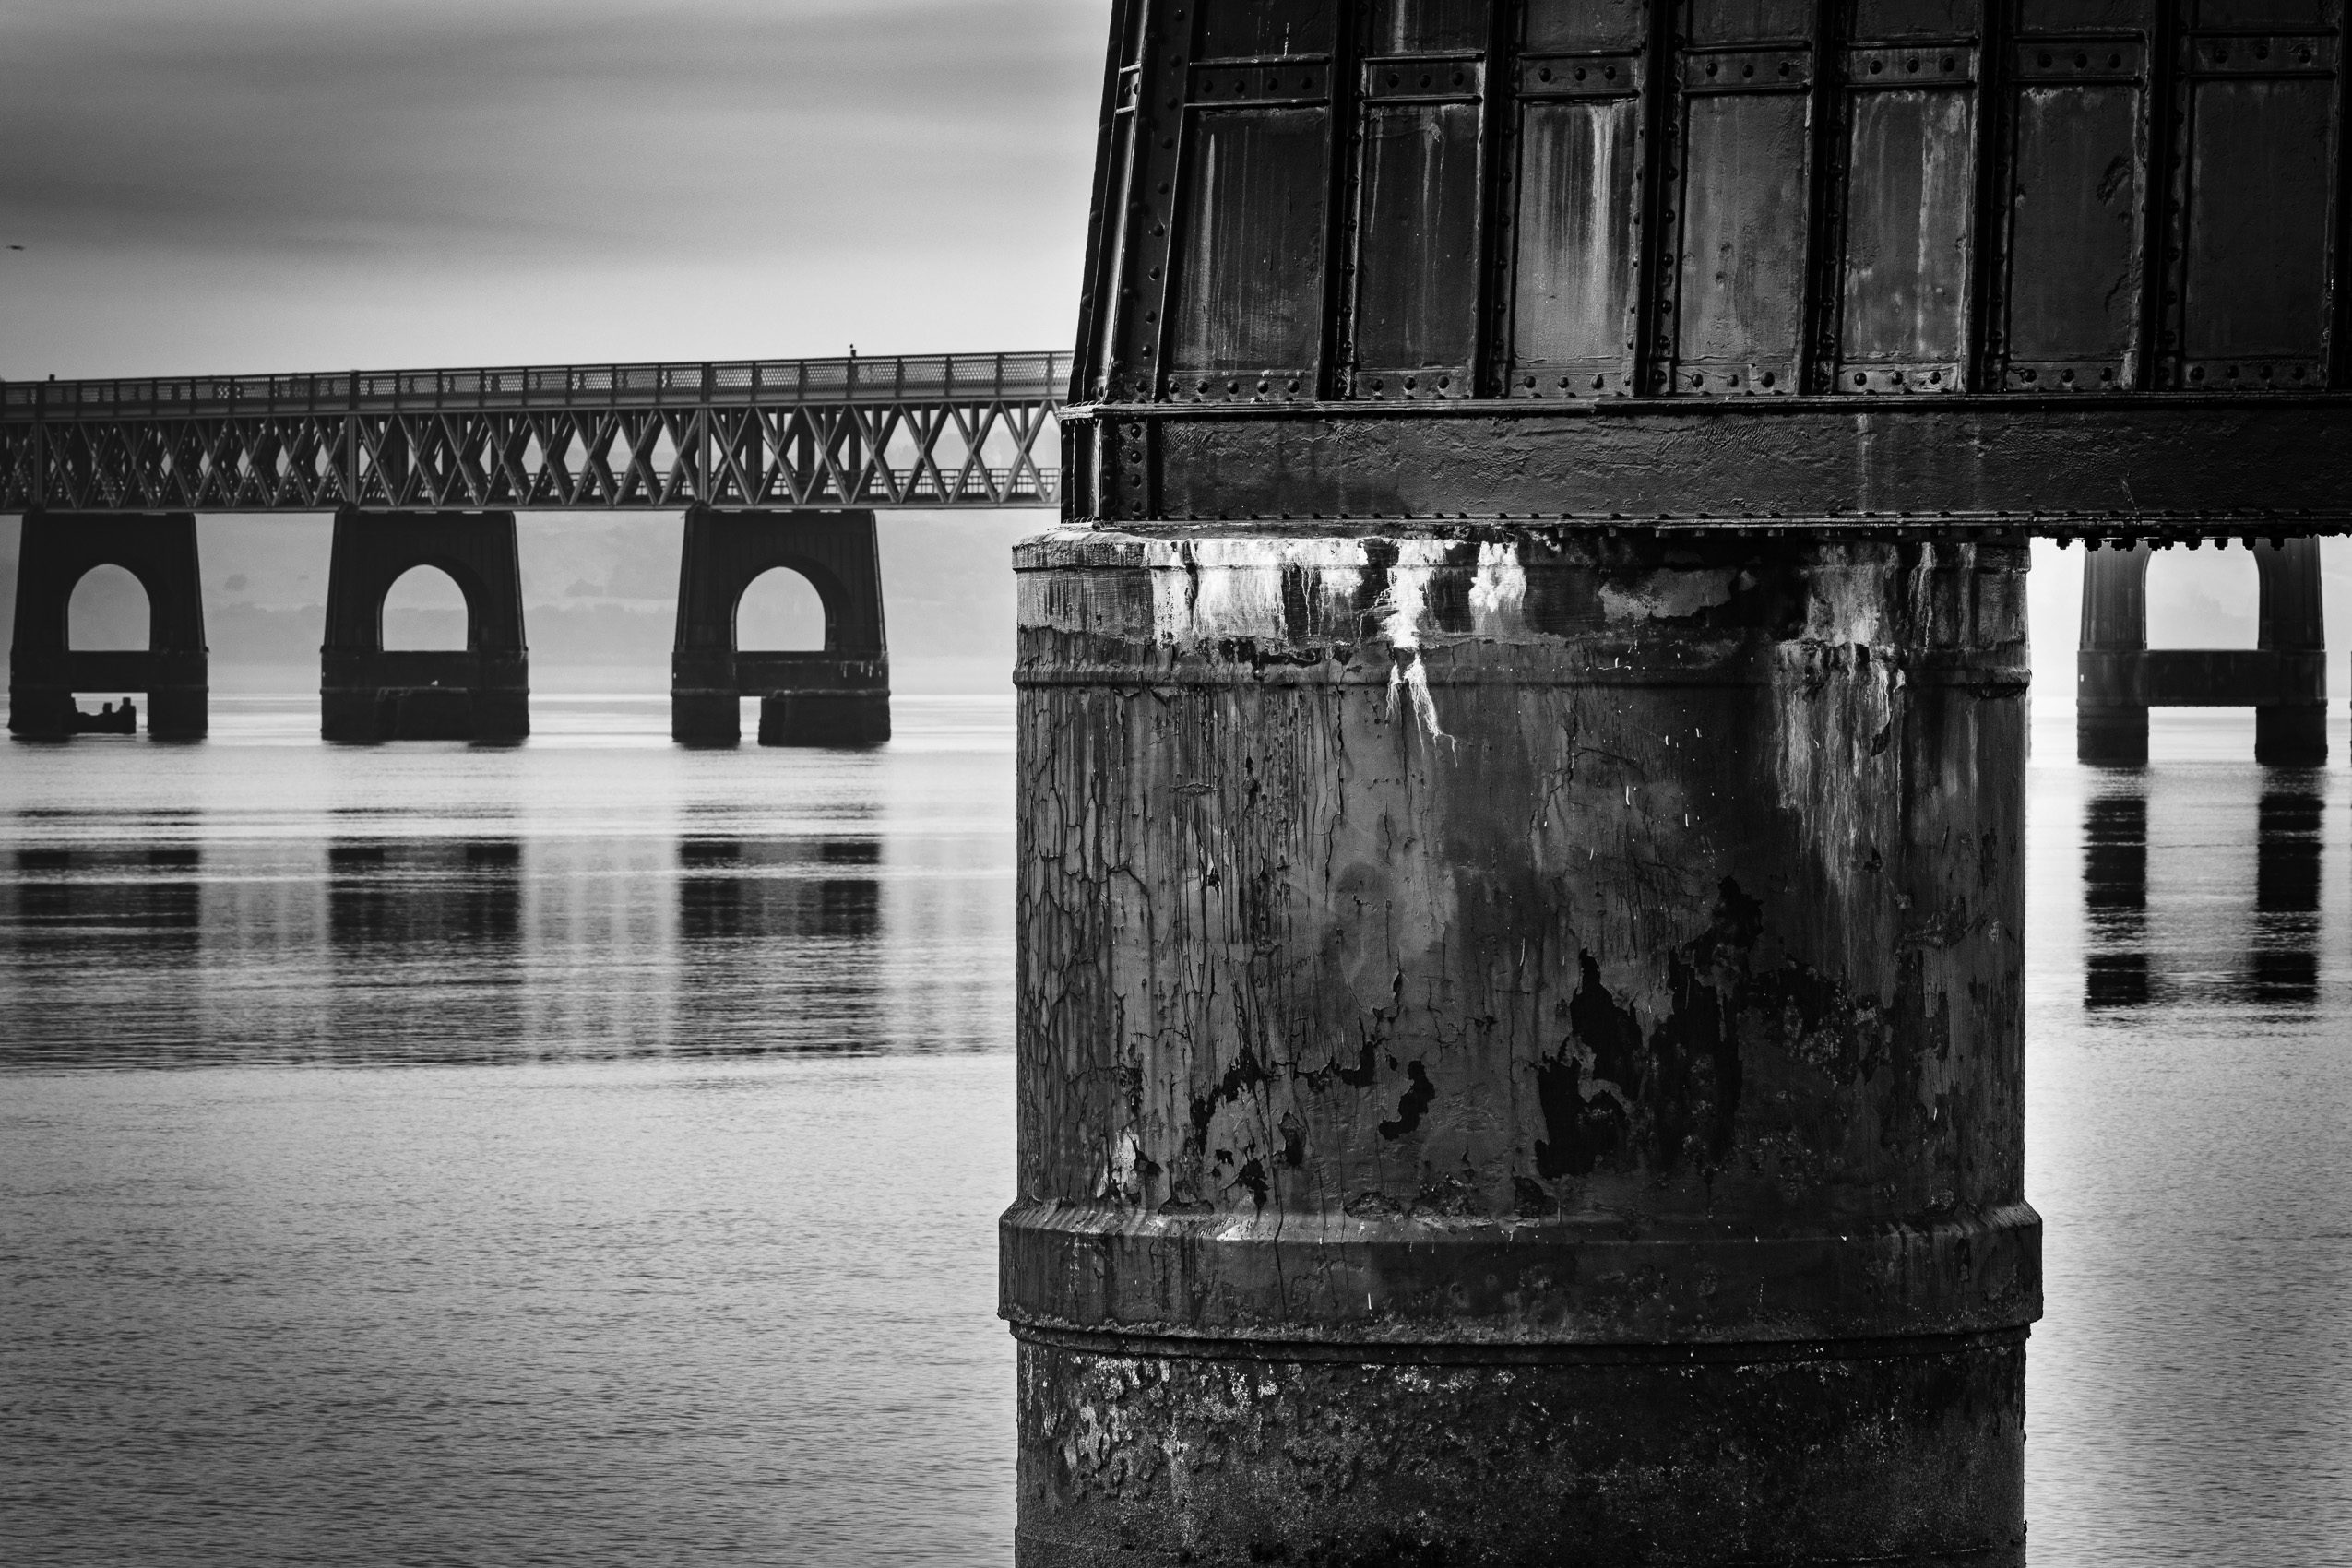 Pier of the Tay Rail Bridge from Dundee, Scotland. DD040